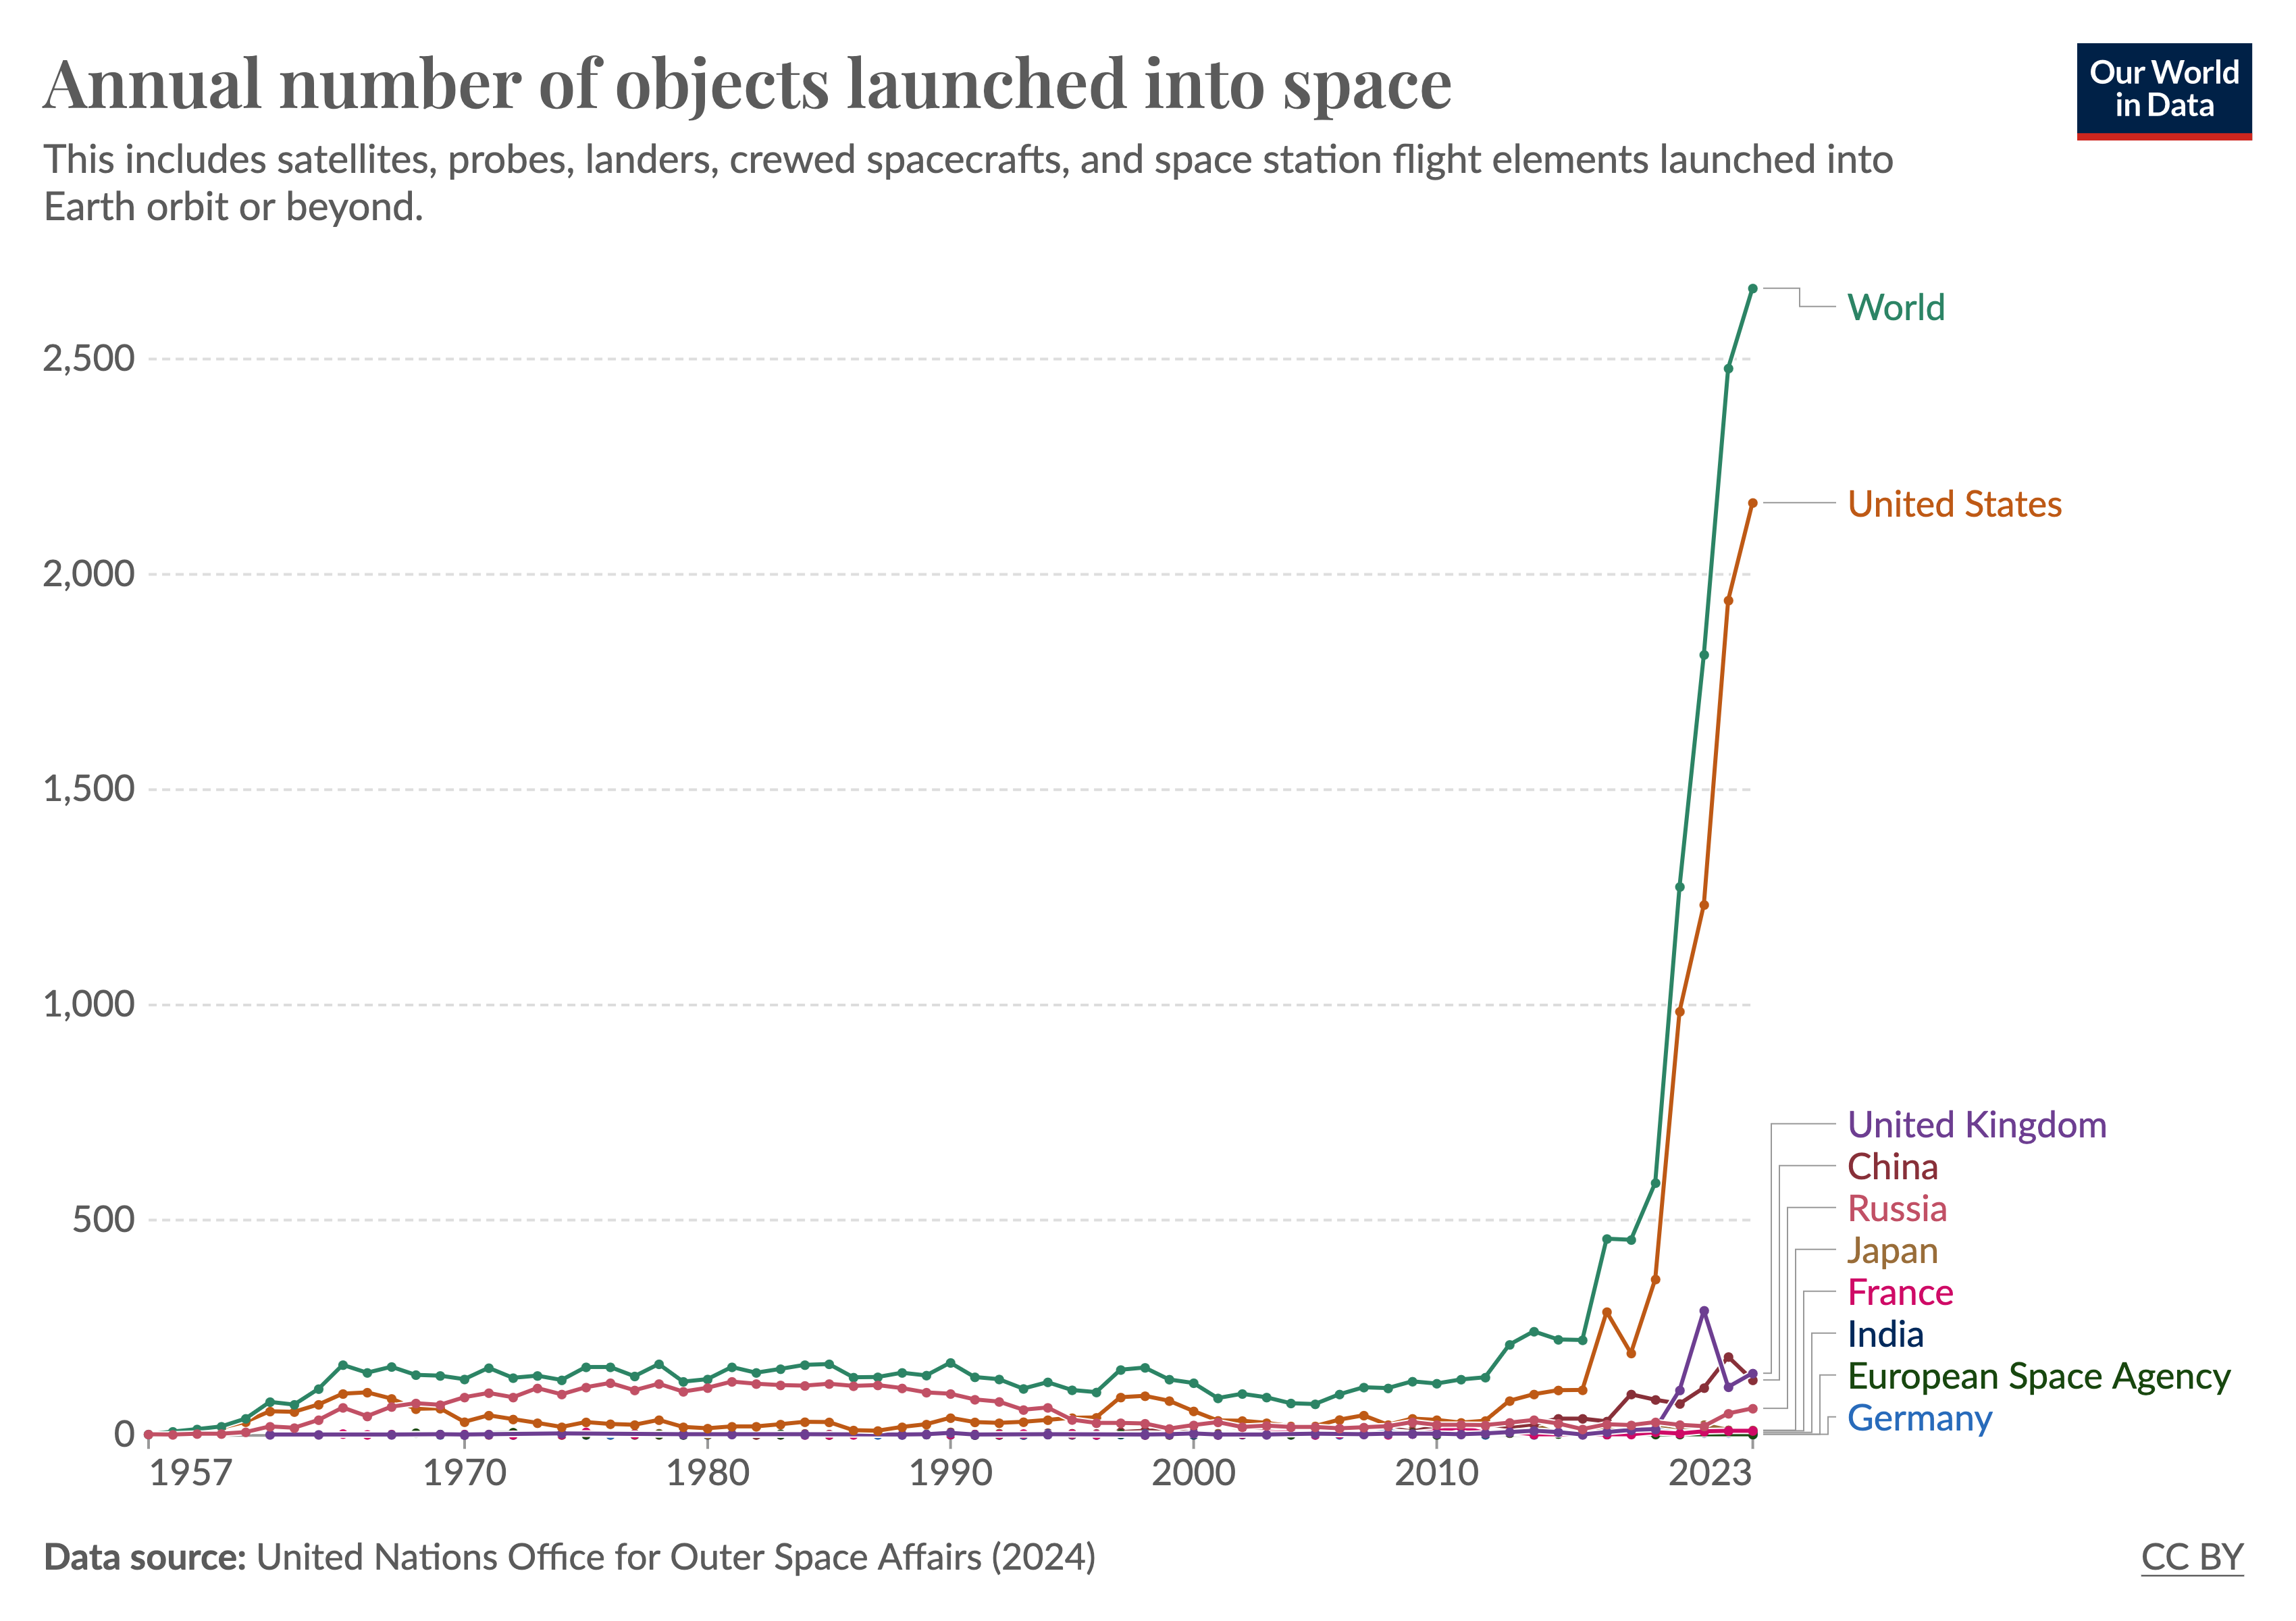 A record number of objects went into space in 2023